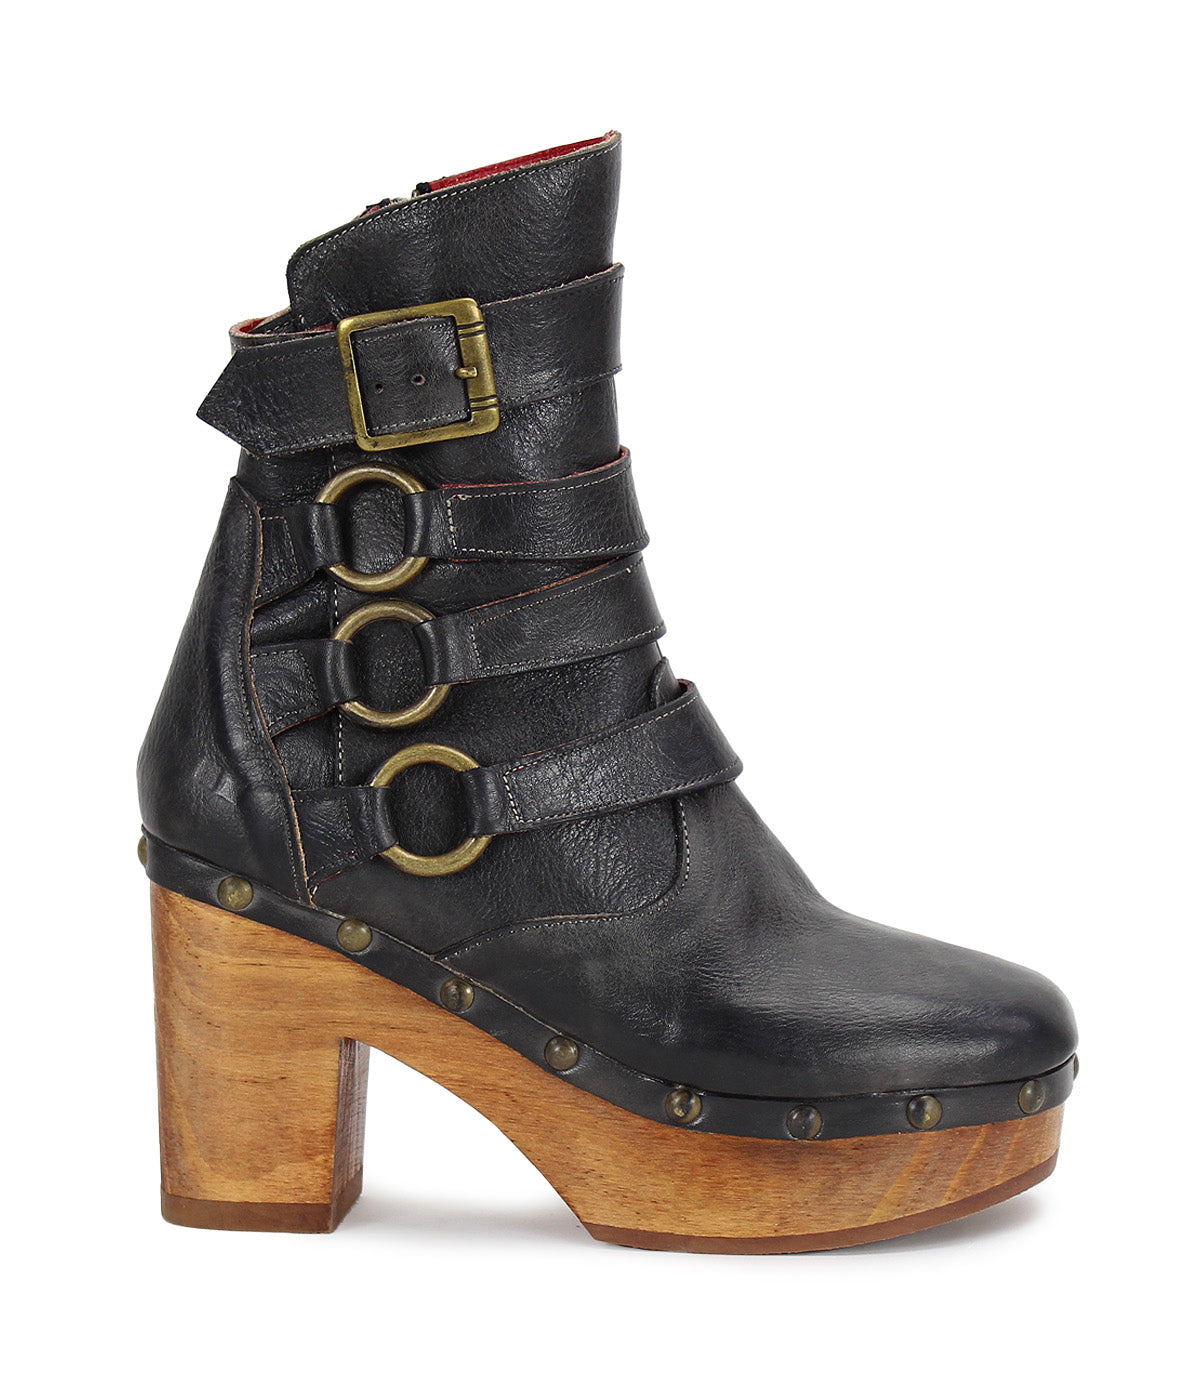 A women's Moira black leather ankle boot with wooden platform and metal accents. Brand: Bed Stu.